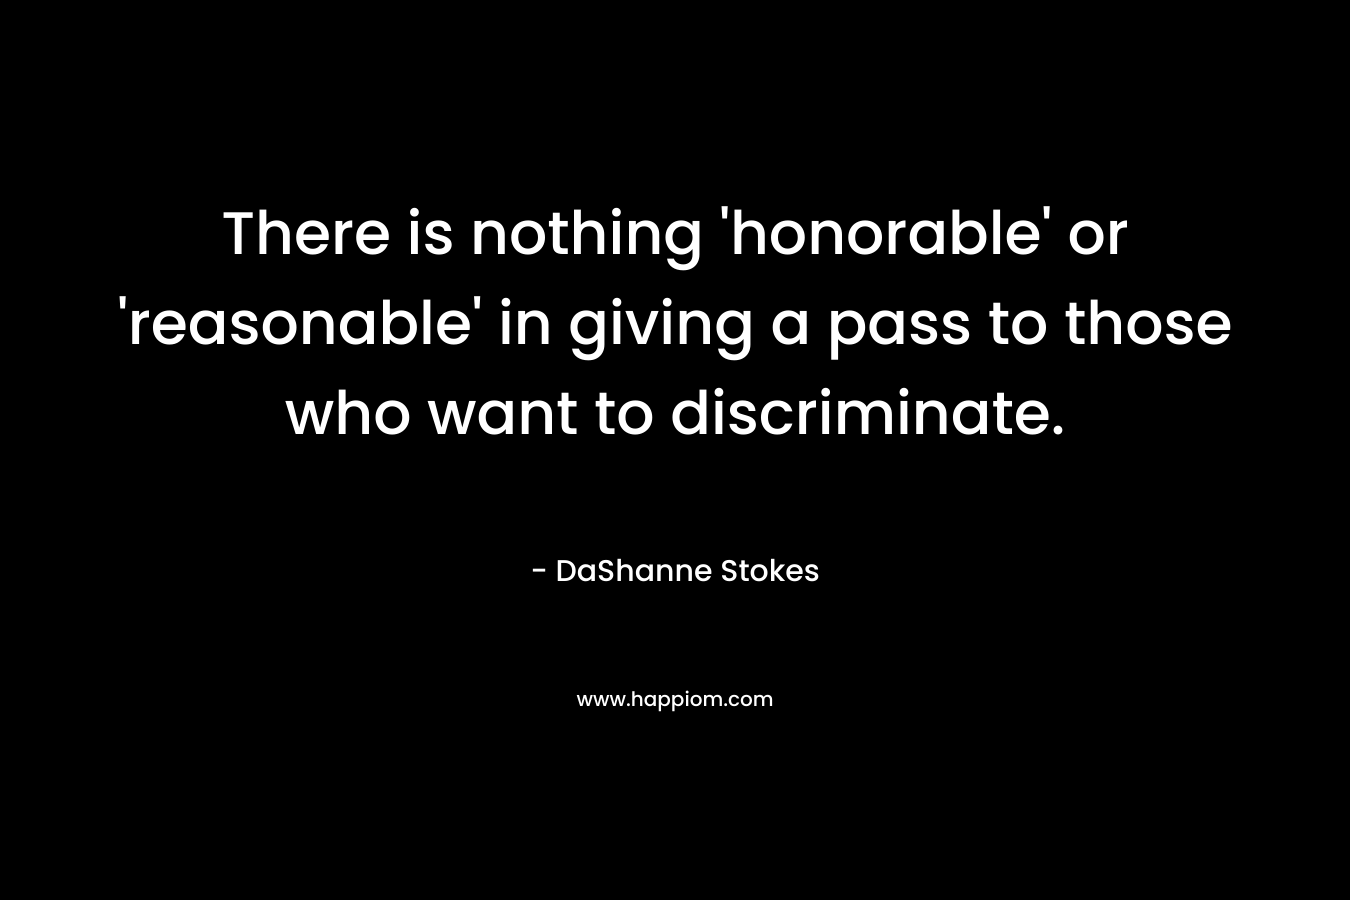 There is nothing 'honorable' or 'reasonable' in giving a pass to those who want to discriminate.